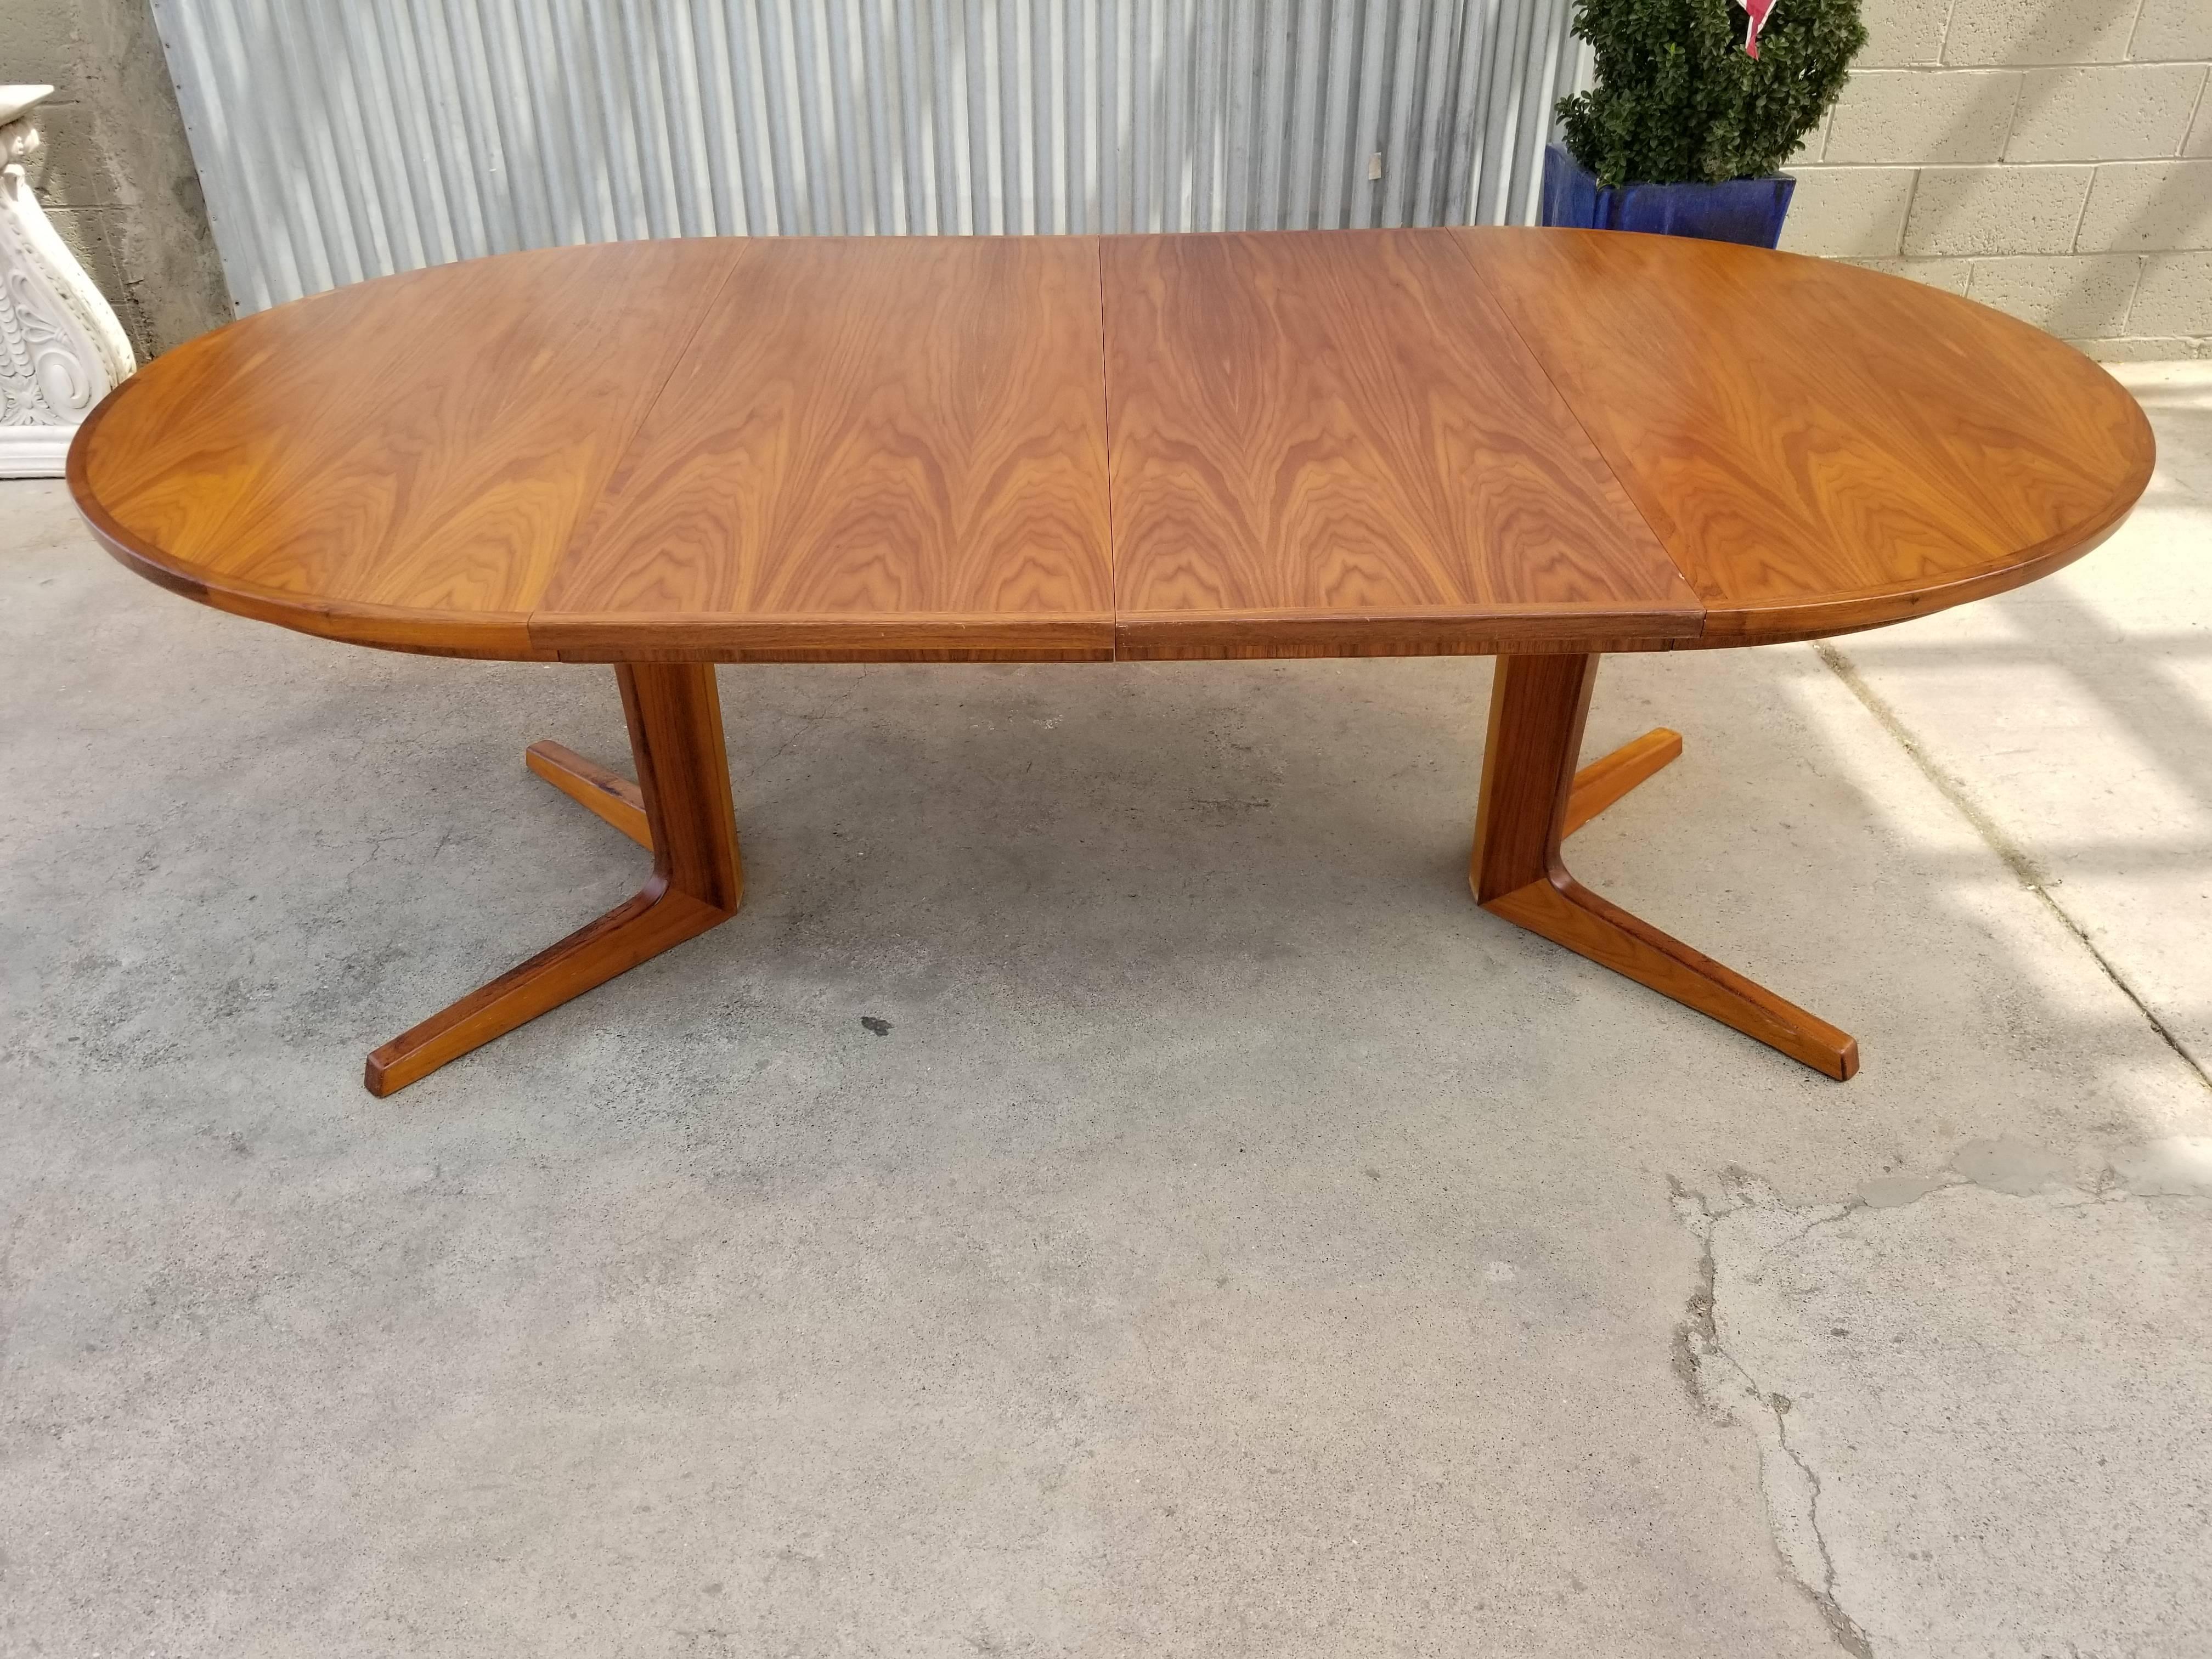 Teak Danish modern circular dining table. Includes two 20" table leaves expanding table to a maximum width of 87.75". Solid teak pedestal base and legs. Soft wood with teak veneer top. No particle board. Adjustable glides built into legs